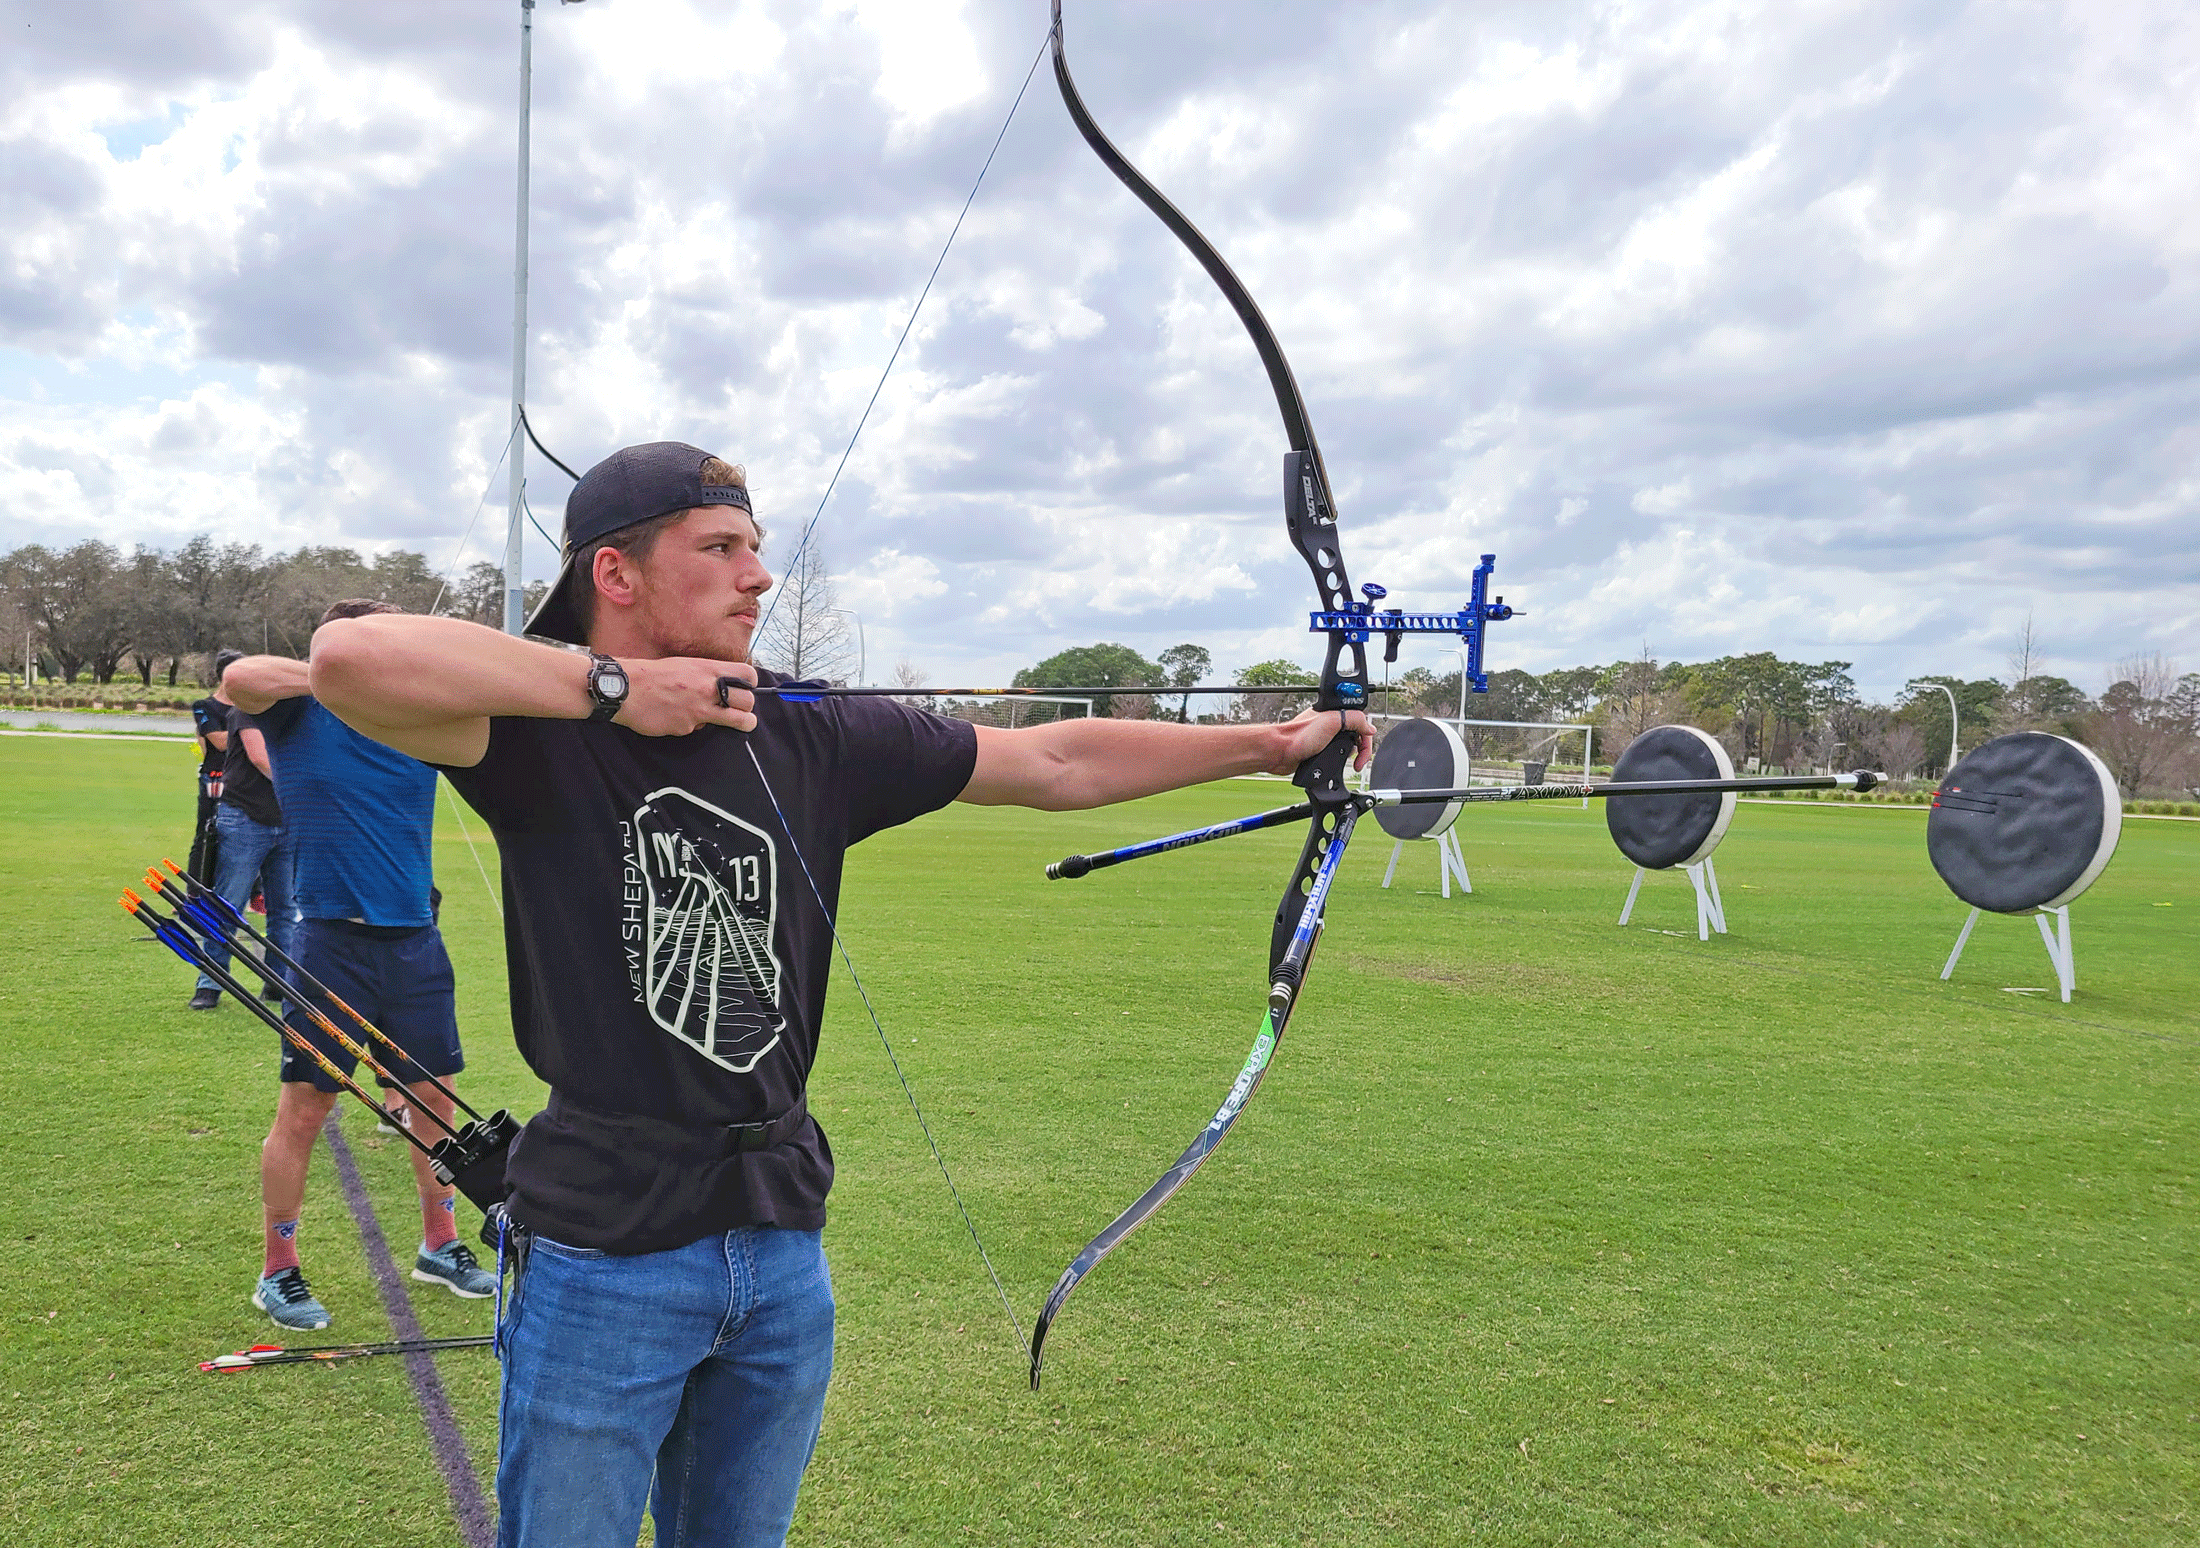 Florida Poly expands athletics with new archery range on campus